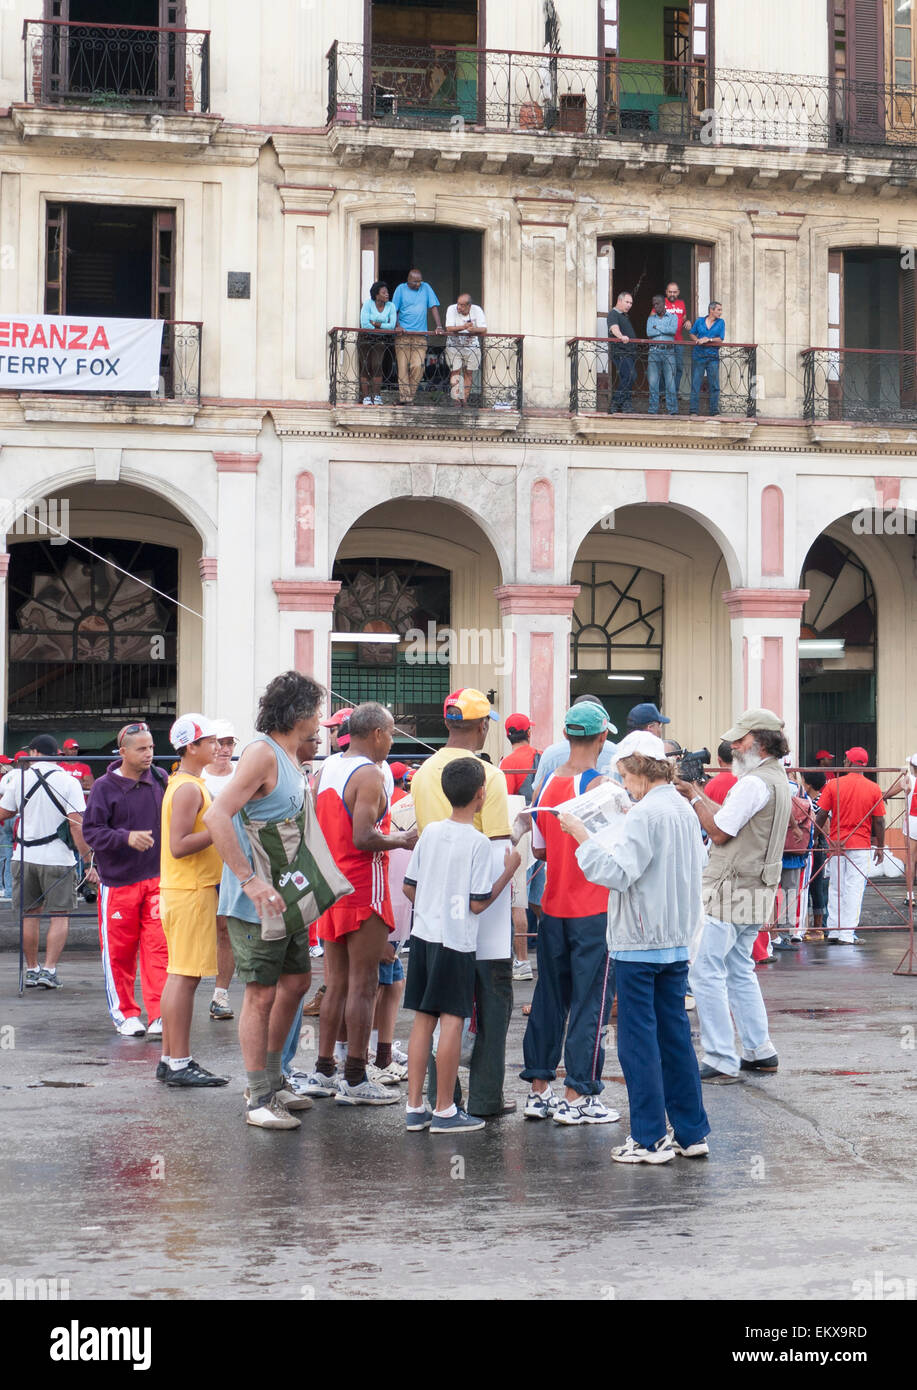 Groups of people after the Havana marathon outside curves arches and layered balconies of the  classical Spanish architecture Stock Photo